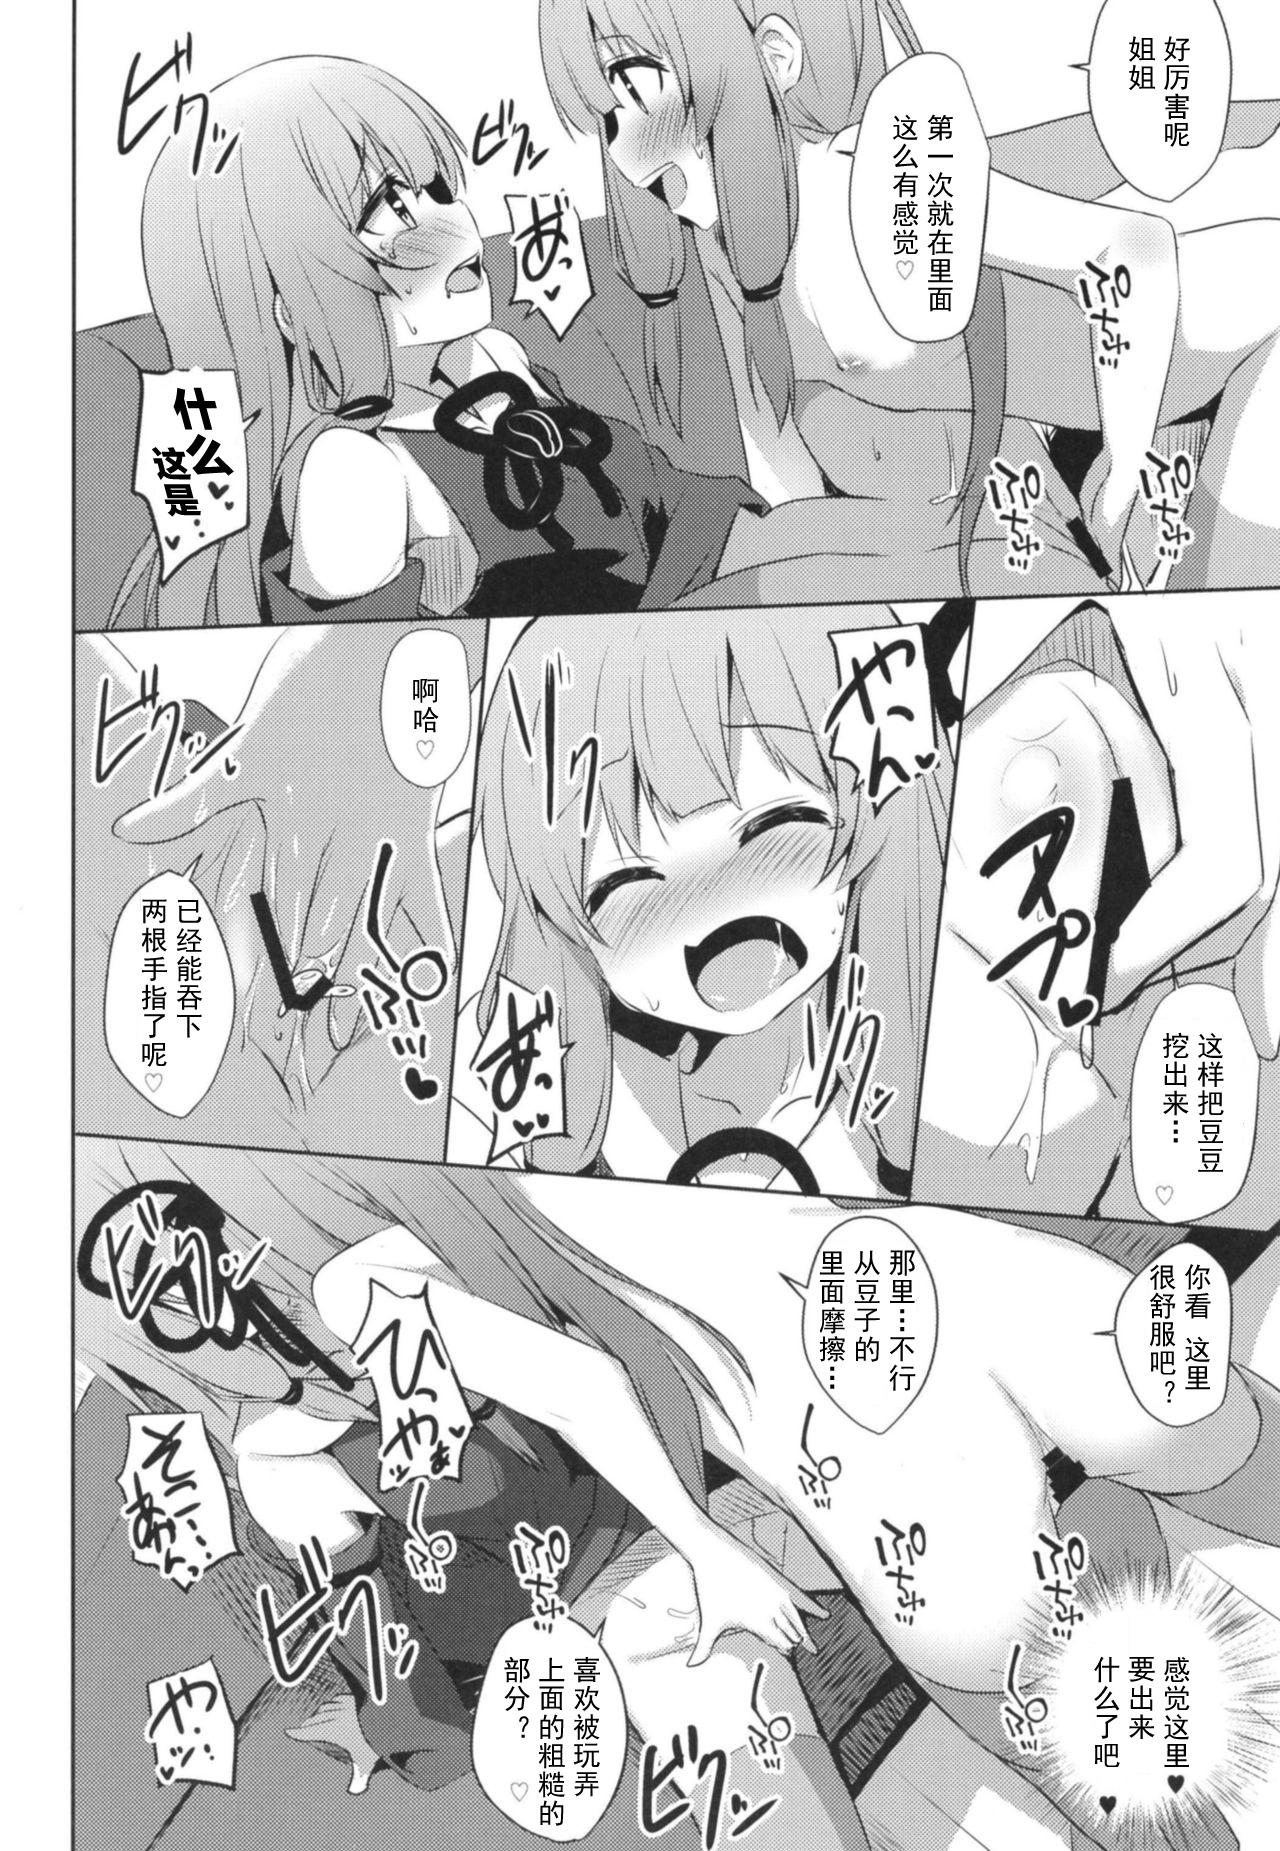 Gemidos [Milk Pudding (Jamcy)] Akane-chan Challenge! 4-kaime (VOICEROID) [Chinese] [古早个人汉化] [Digital] - Voiceroid Milf Fuck - Page 8